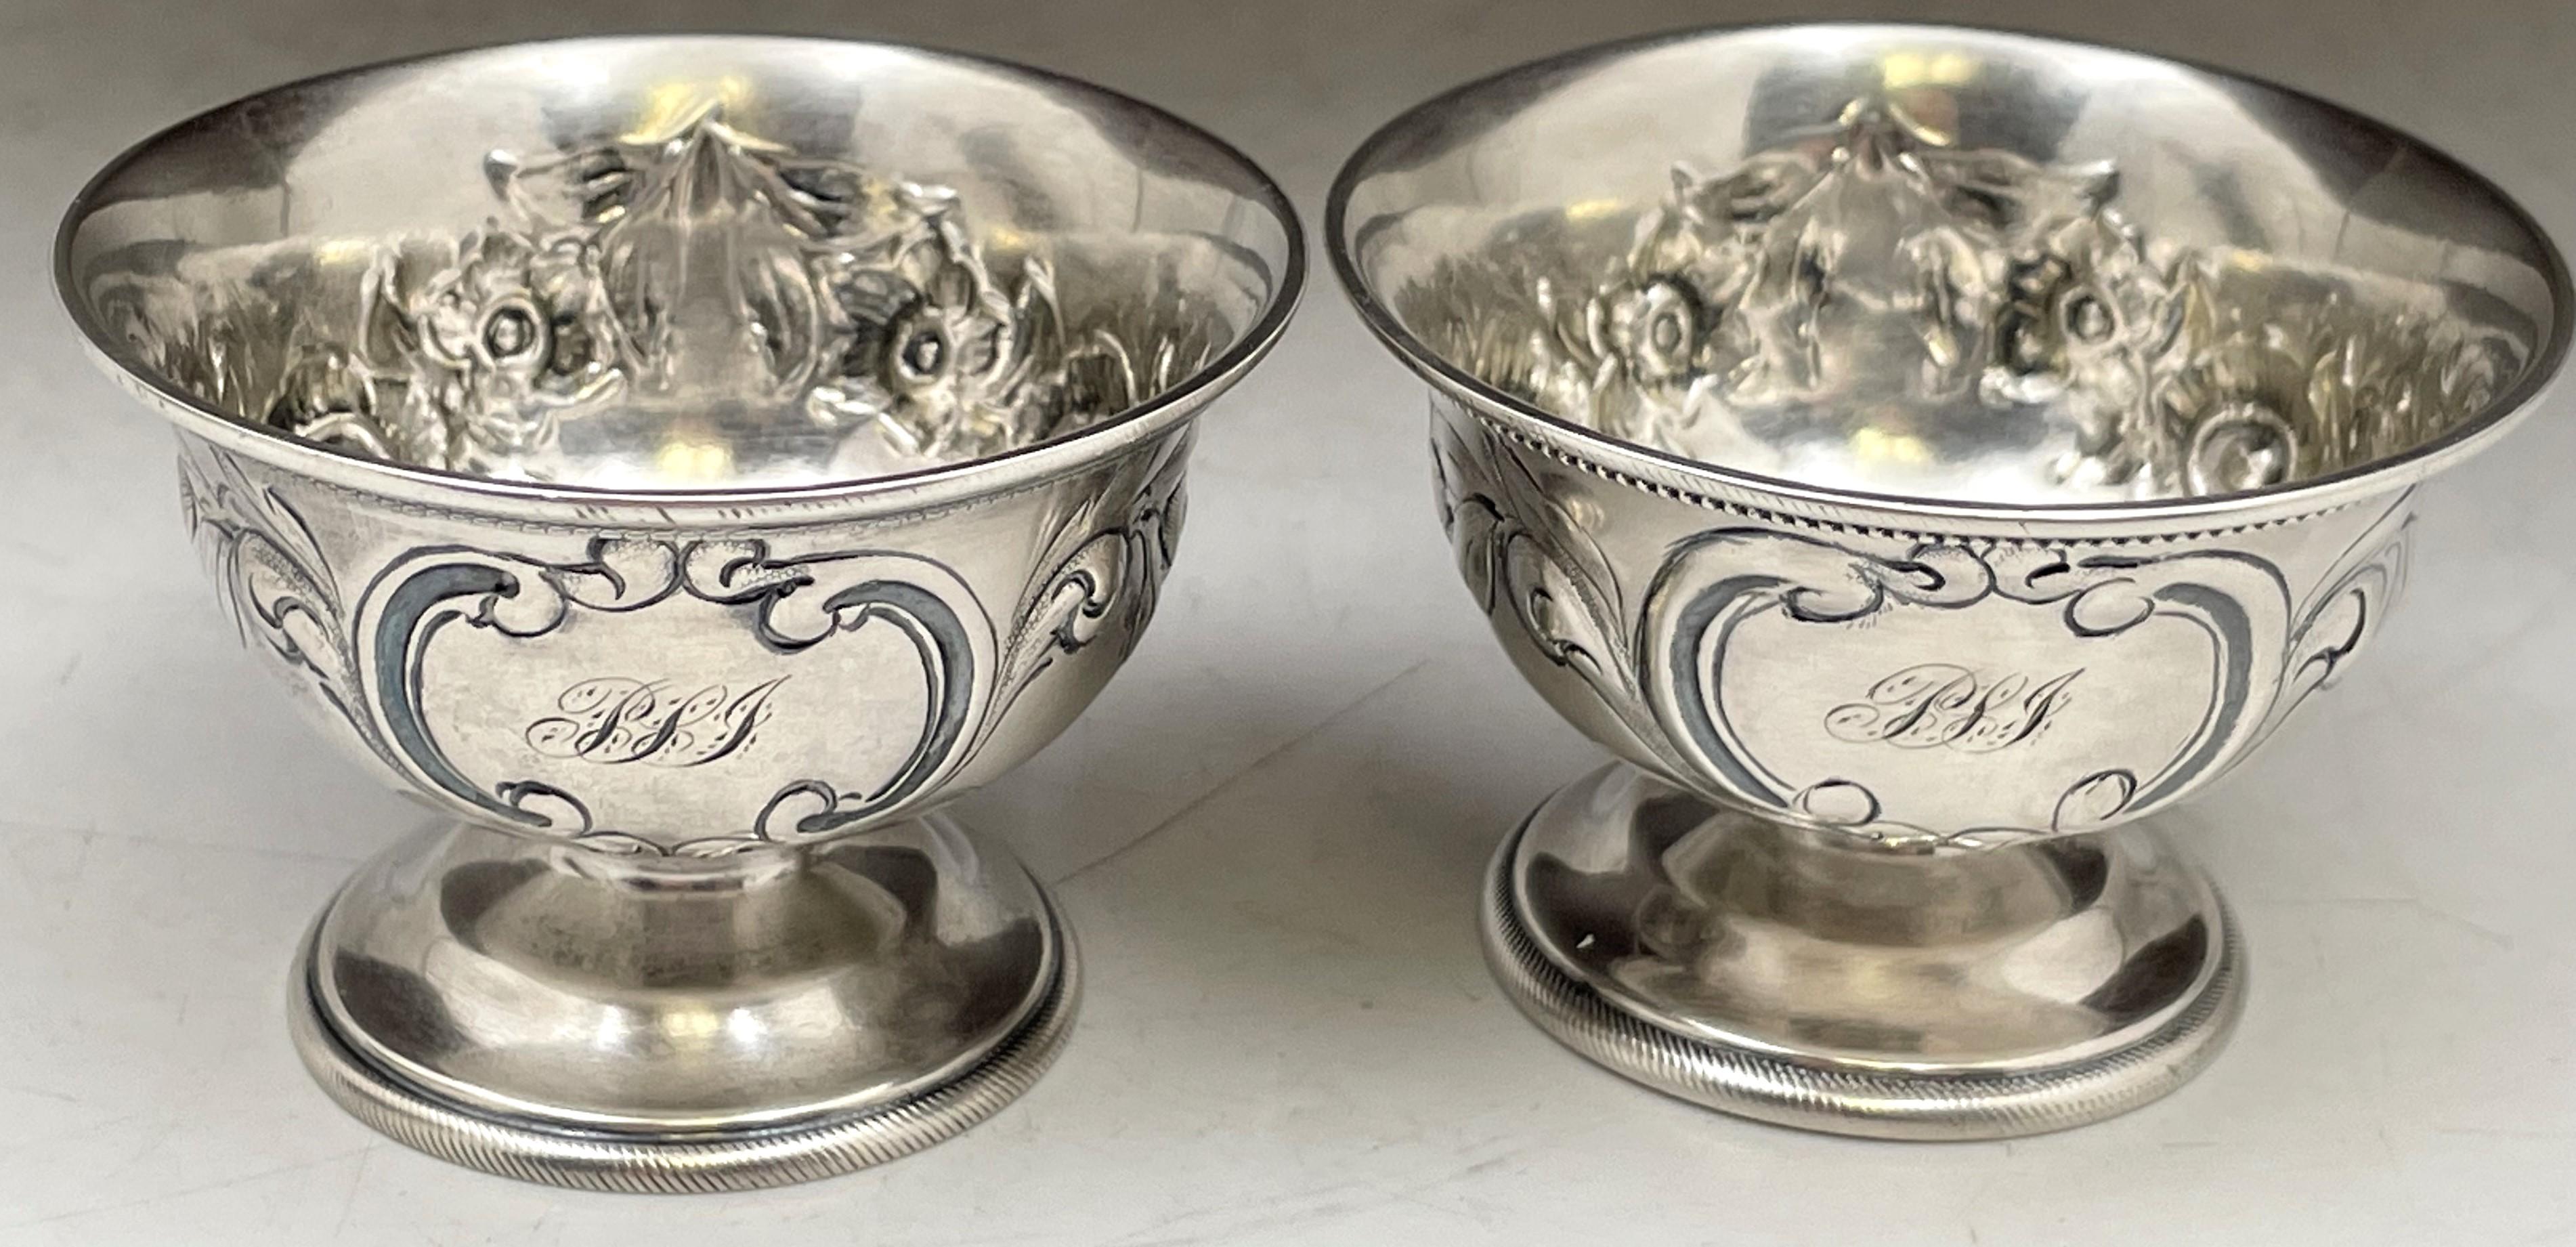 Pair of Gorham, coin silver open salt cellars, made circa 1855 to 1860, beautifully adorned with floral and cartouche motifs. They measure 2 1/2'' in diameter by 1 2/3'' in height, and bear hallmarks and a monogram as shown. 

During the heyday of